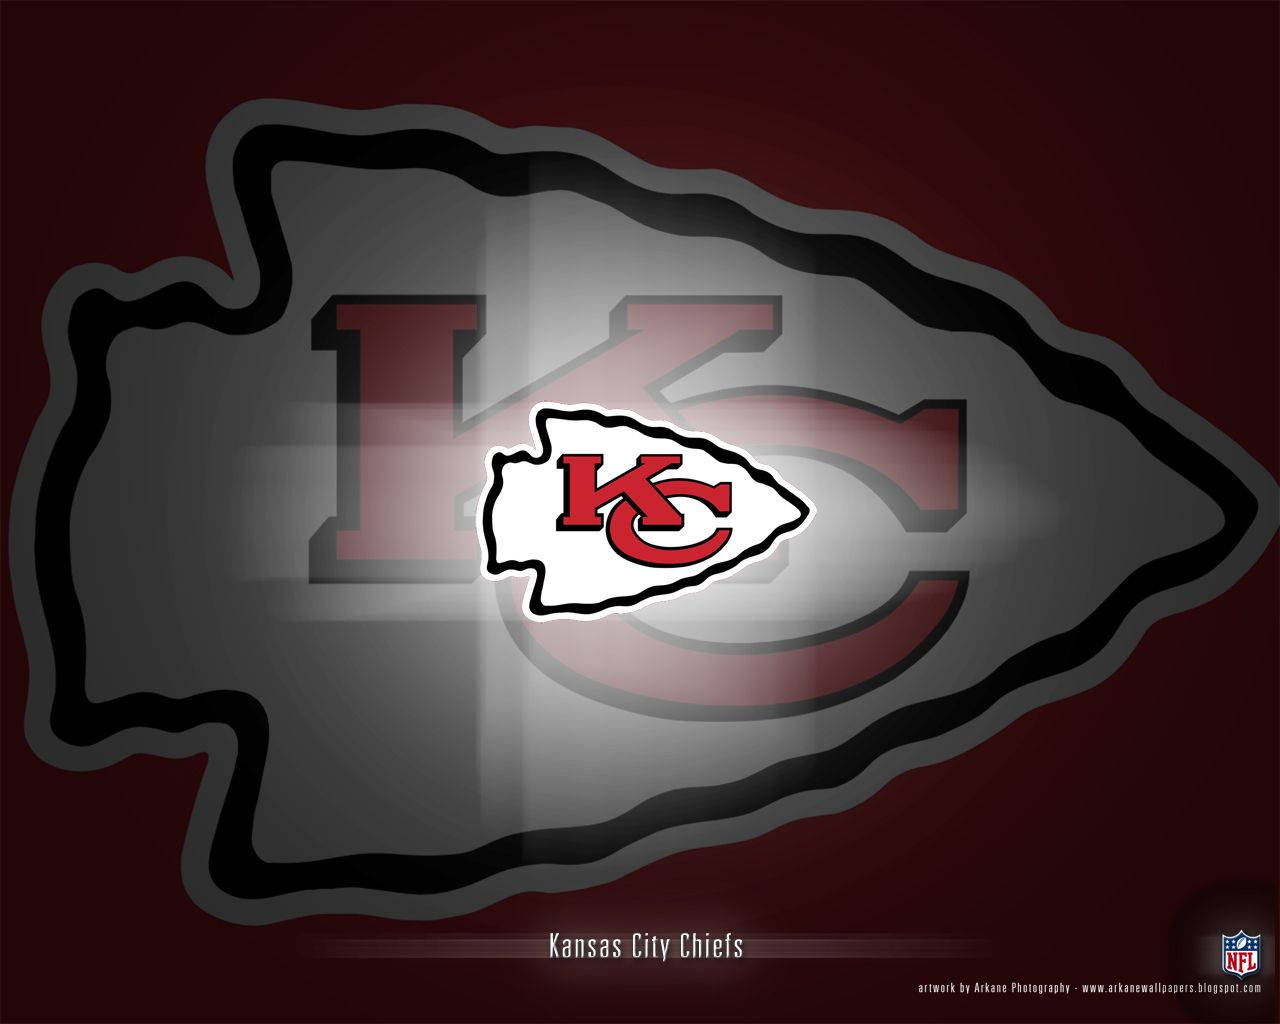 The Kansas City Chiefs Look Cool in this Epic Image Wallpaper